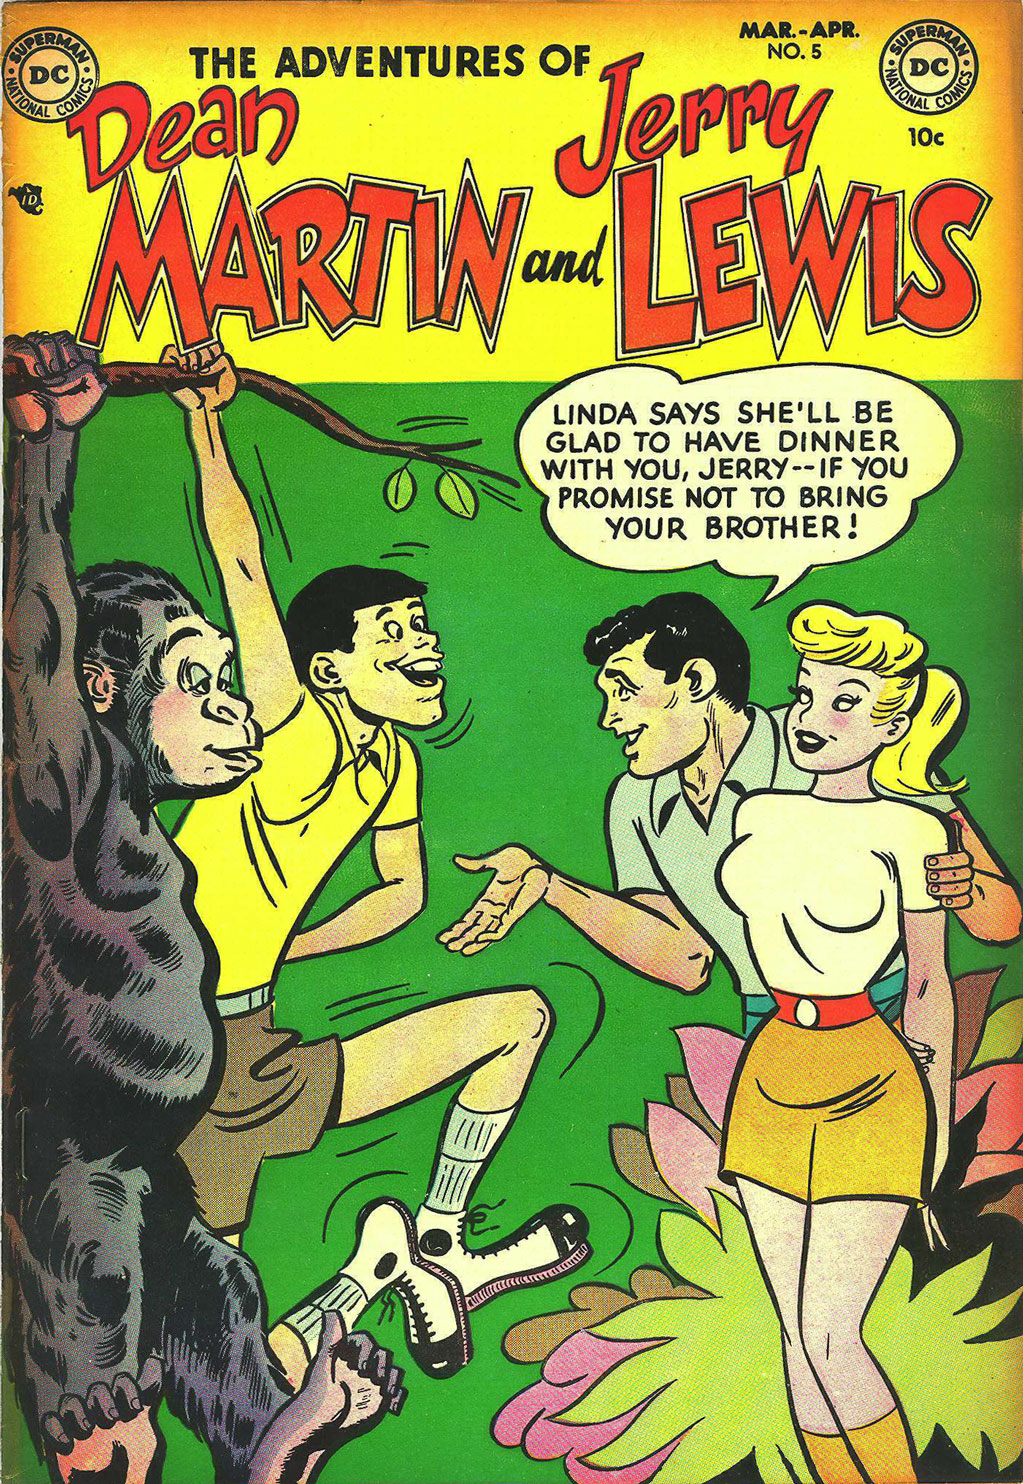 Read online The Adventures of Dean Martin and Jerry Lewis comic -  Issue #5 - 1